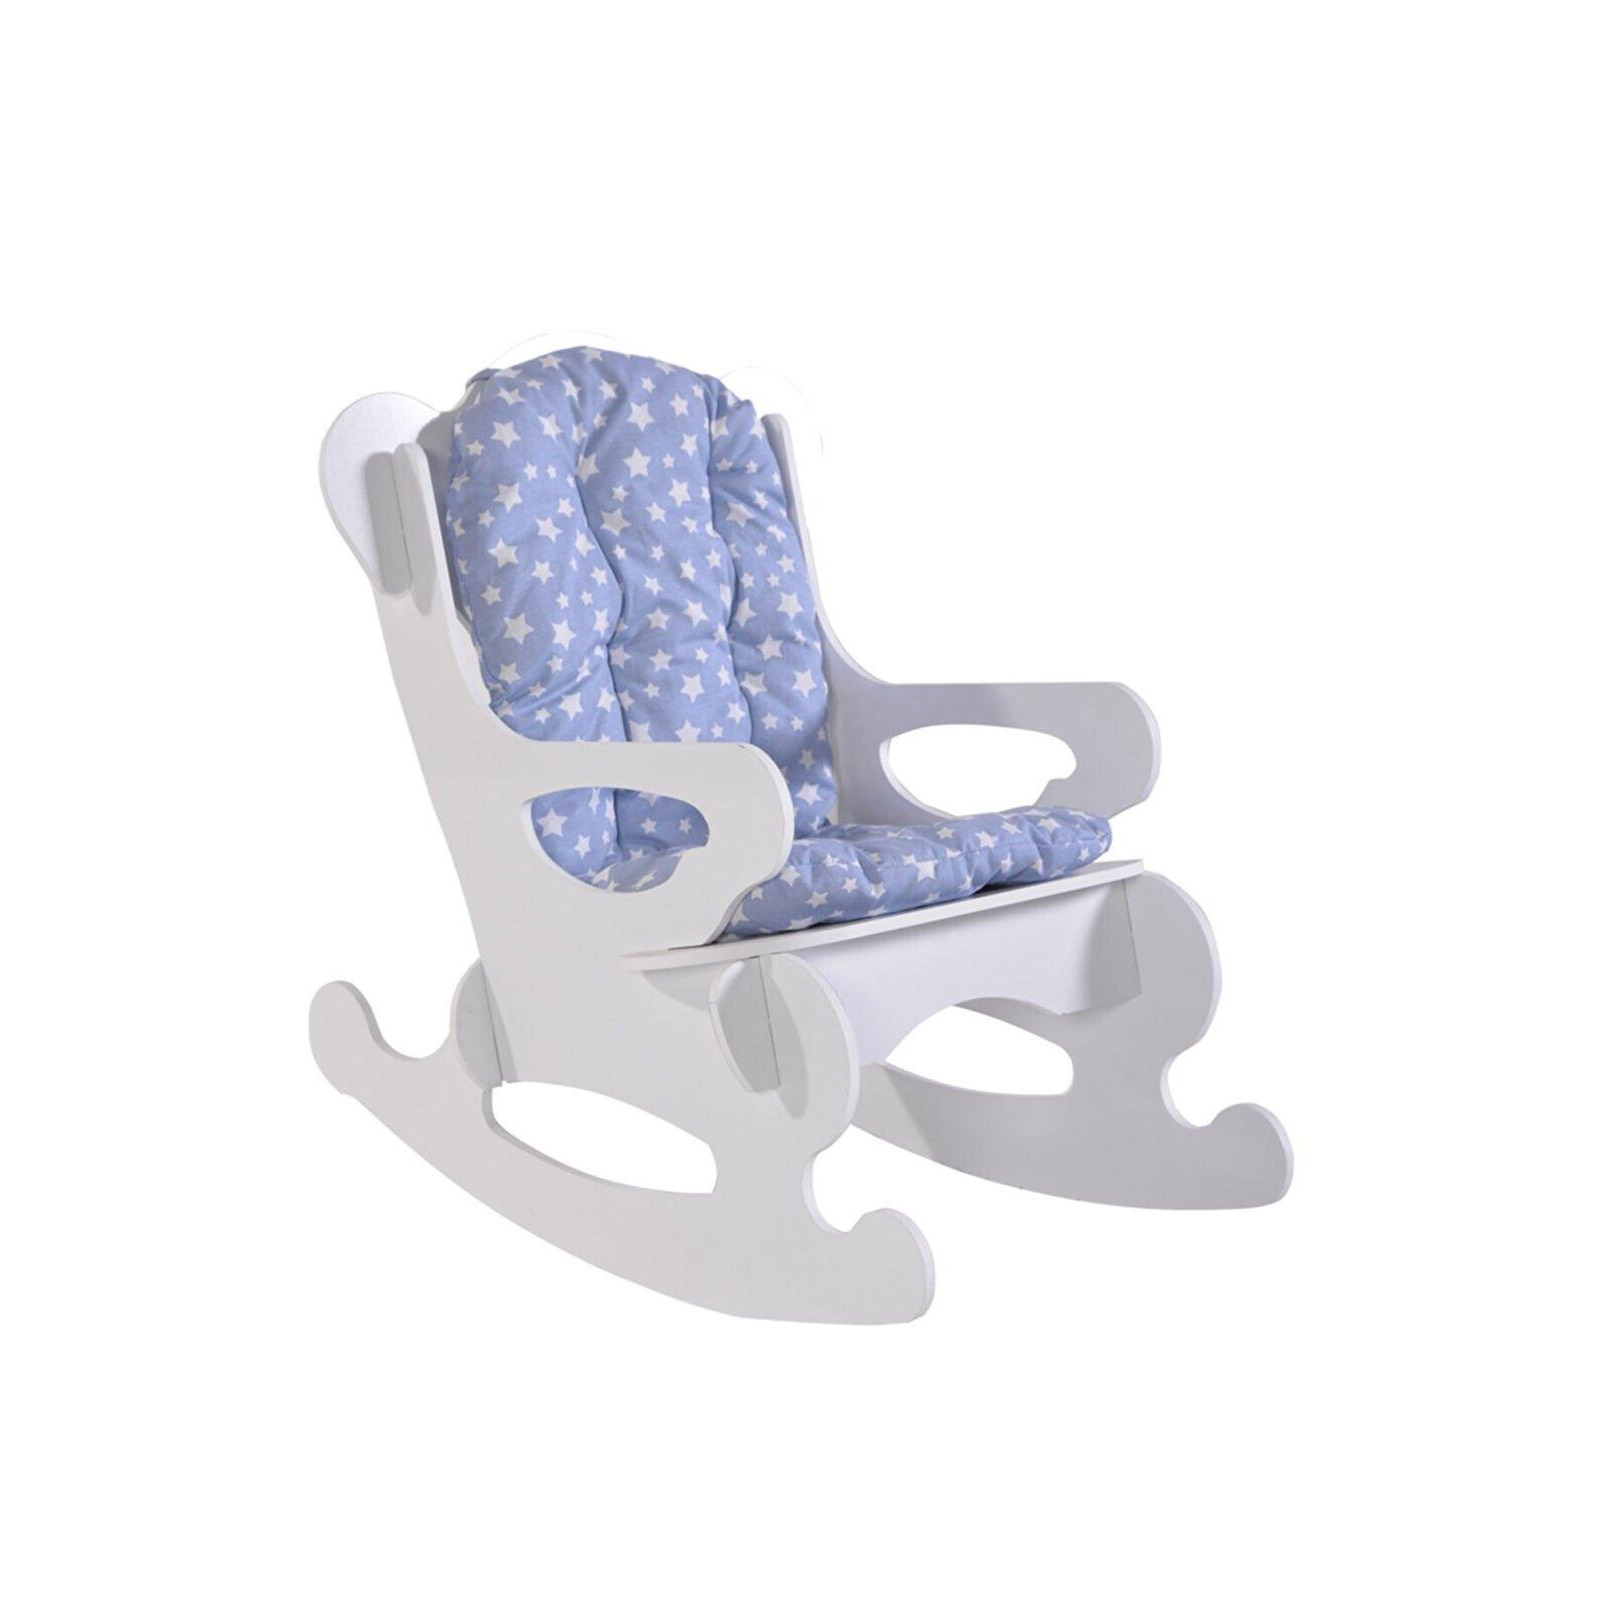 Kids Rocking Chair With Cushion - image 1